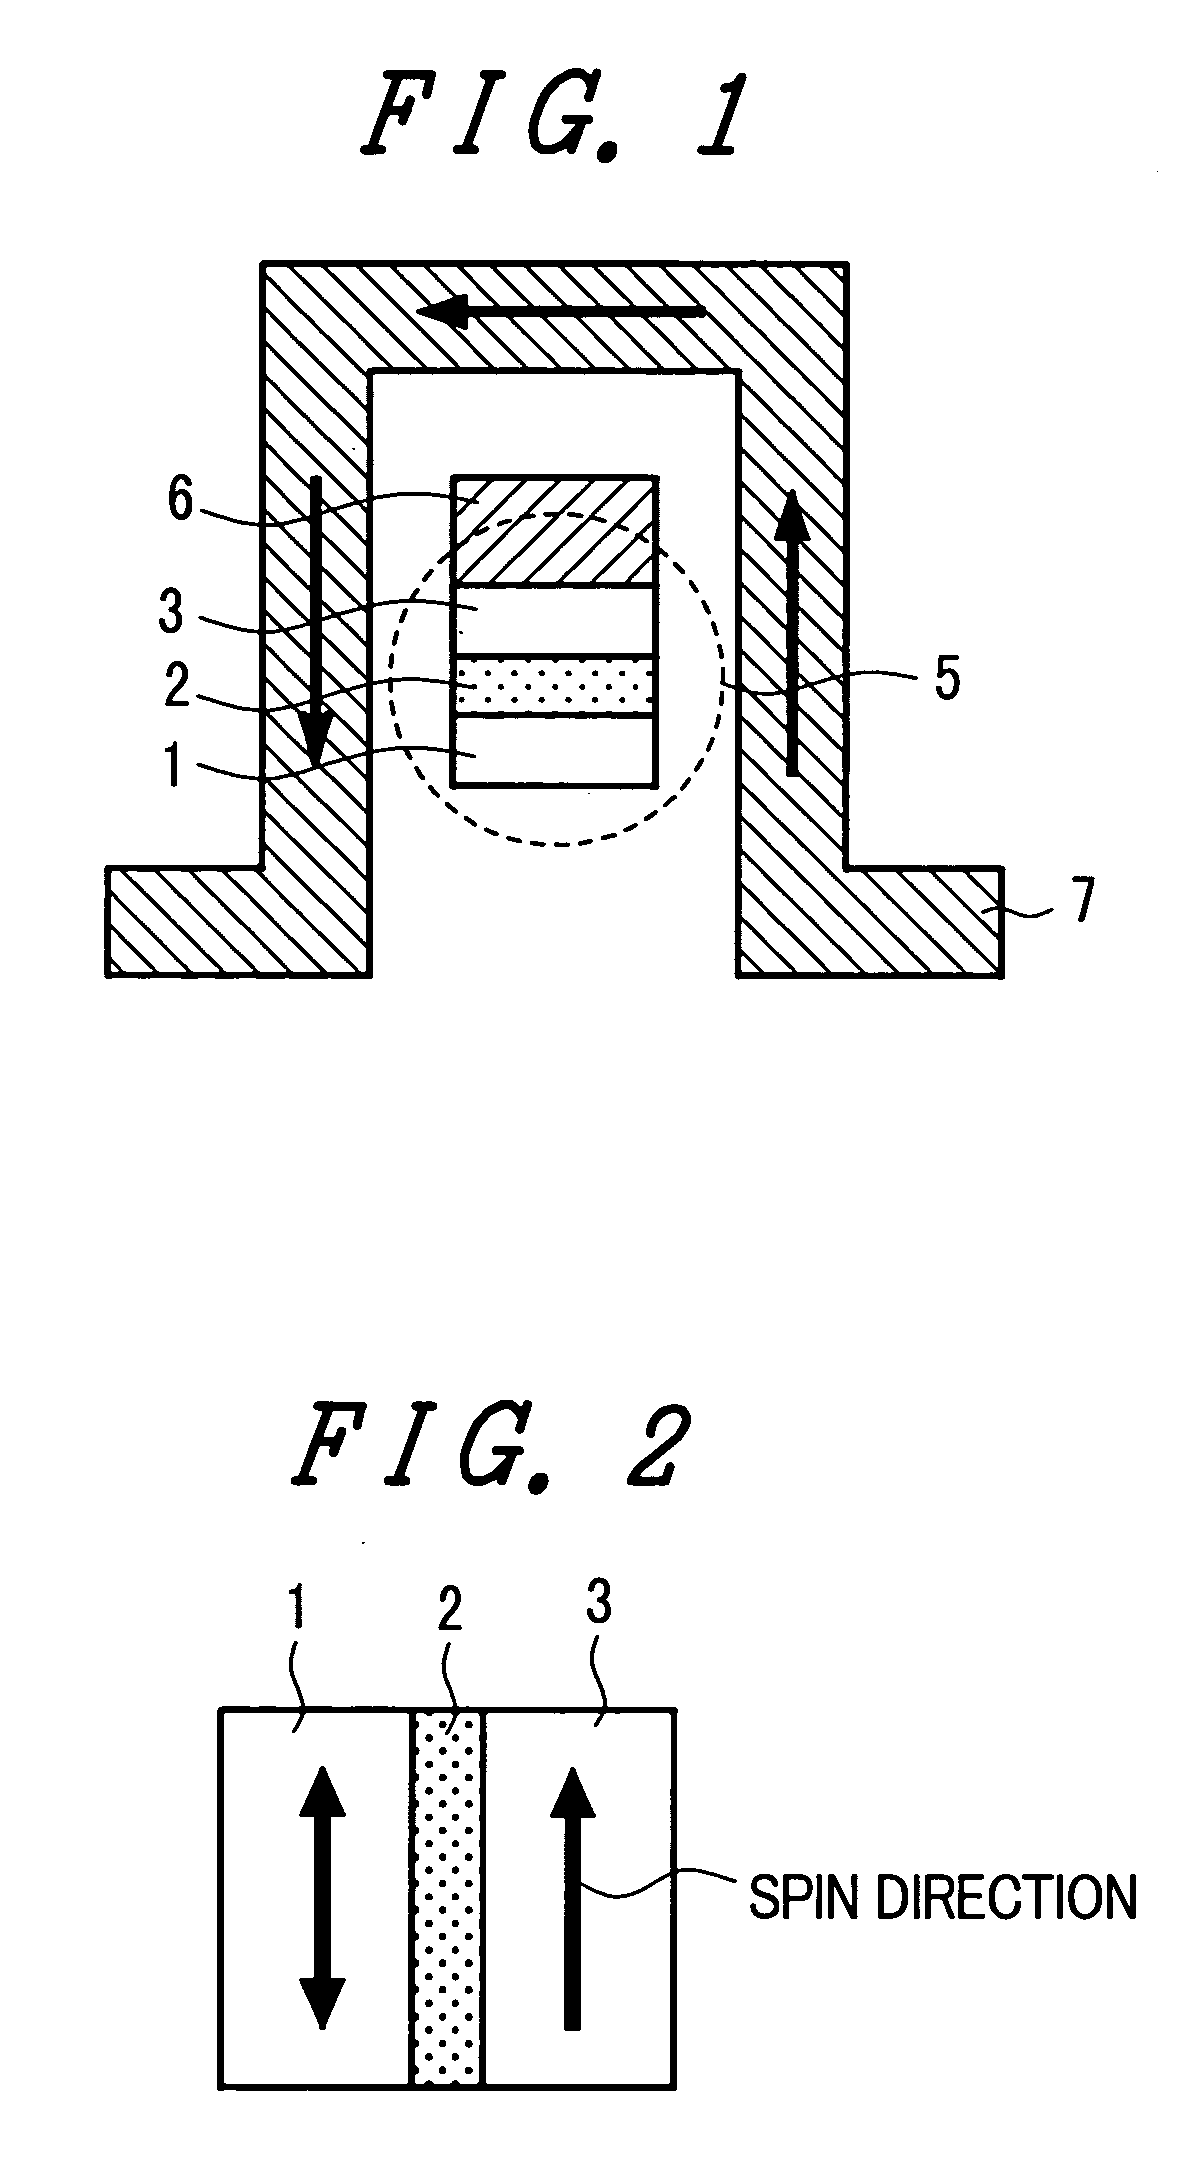 Magnetic semiconductor memory device